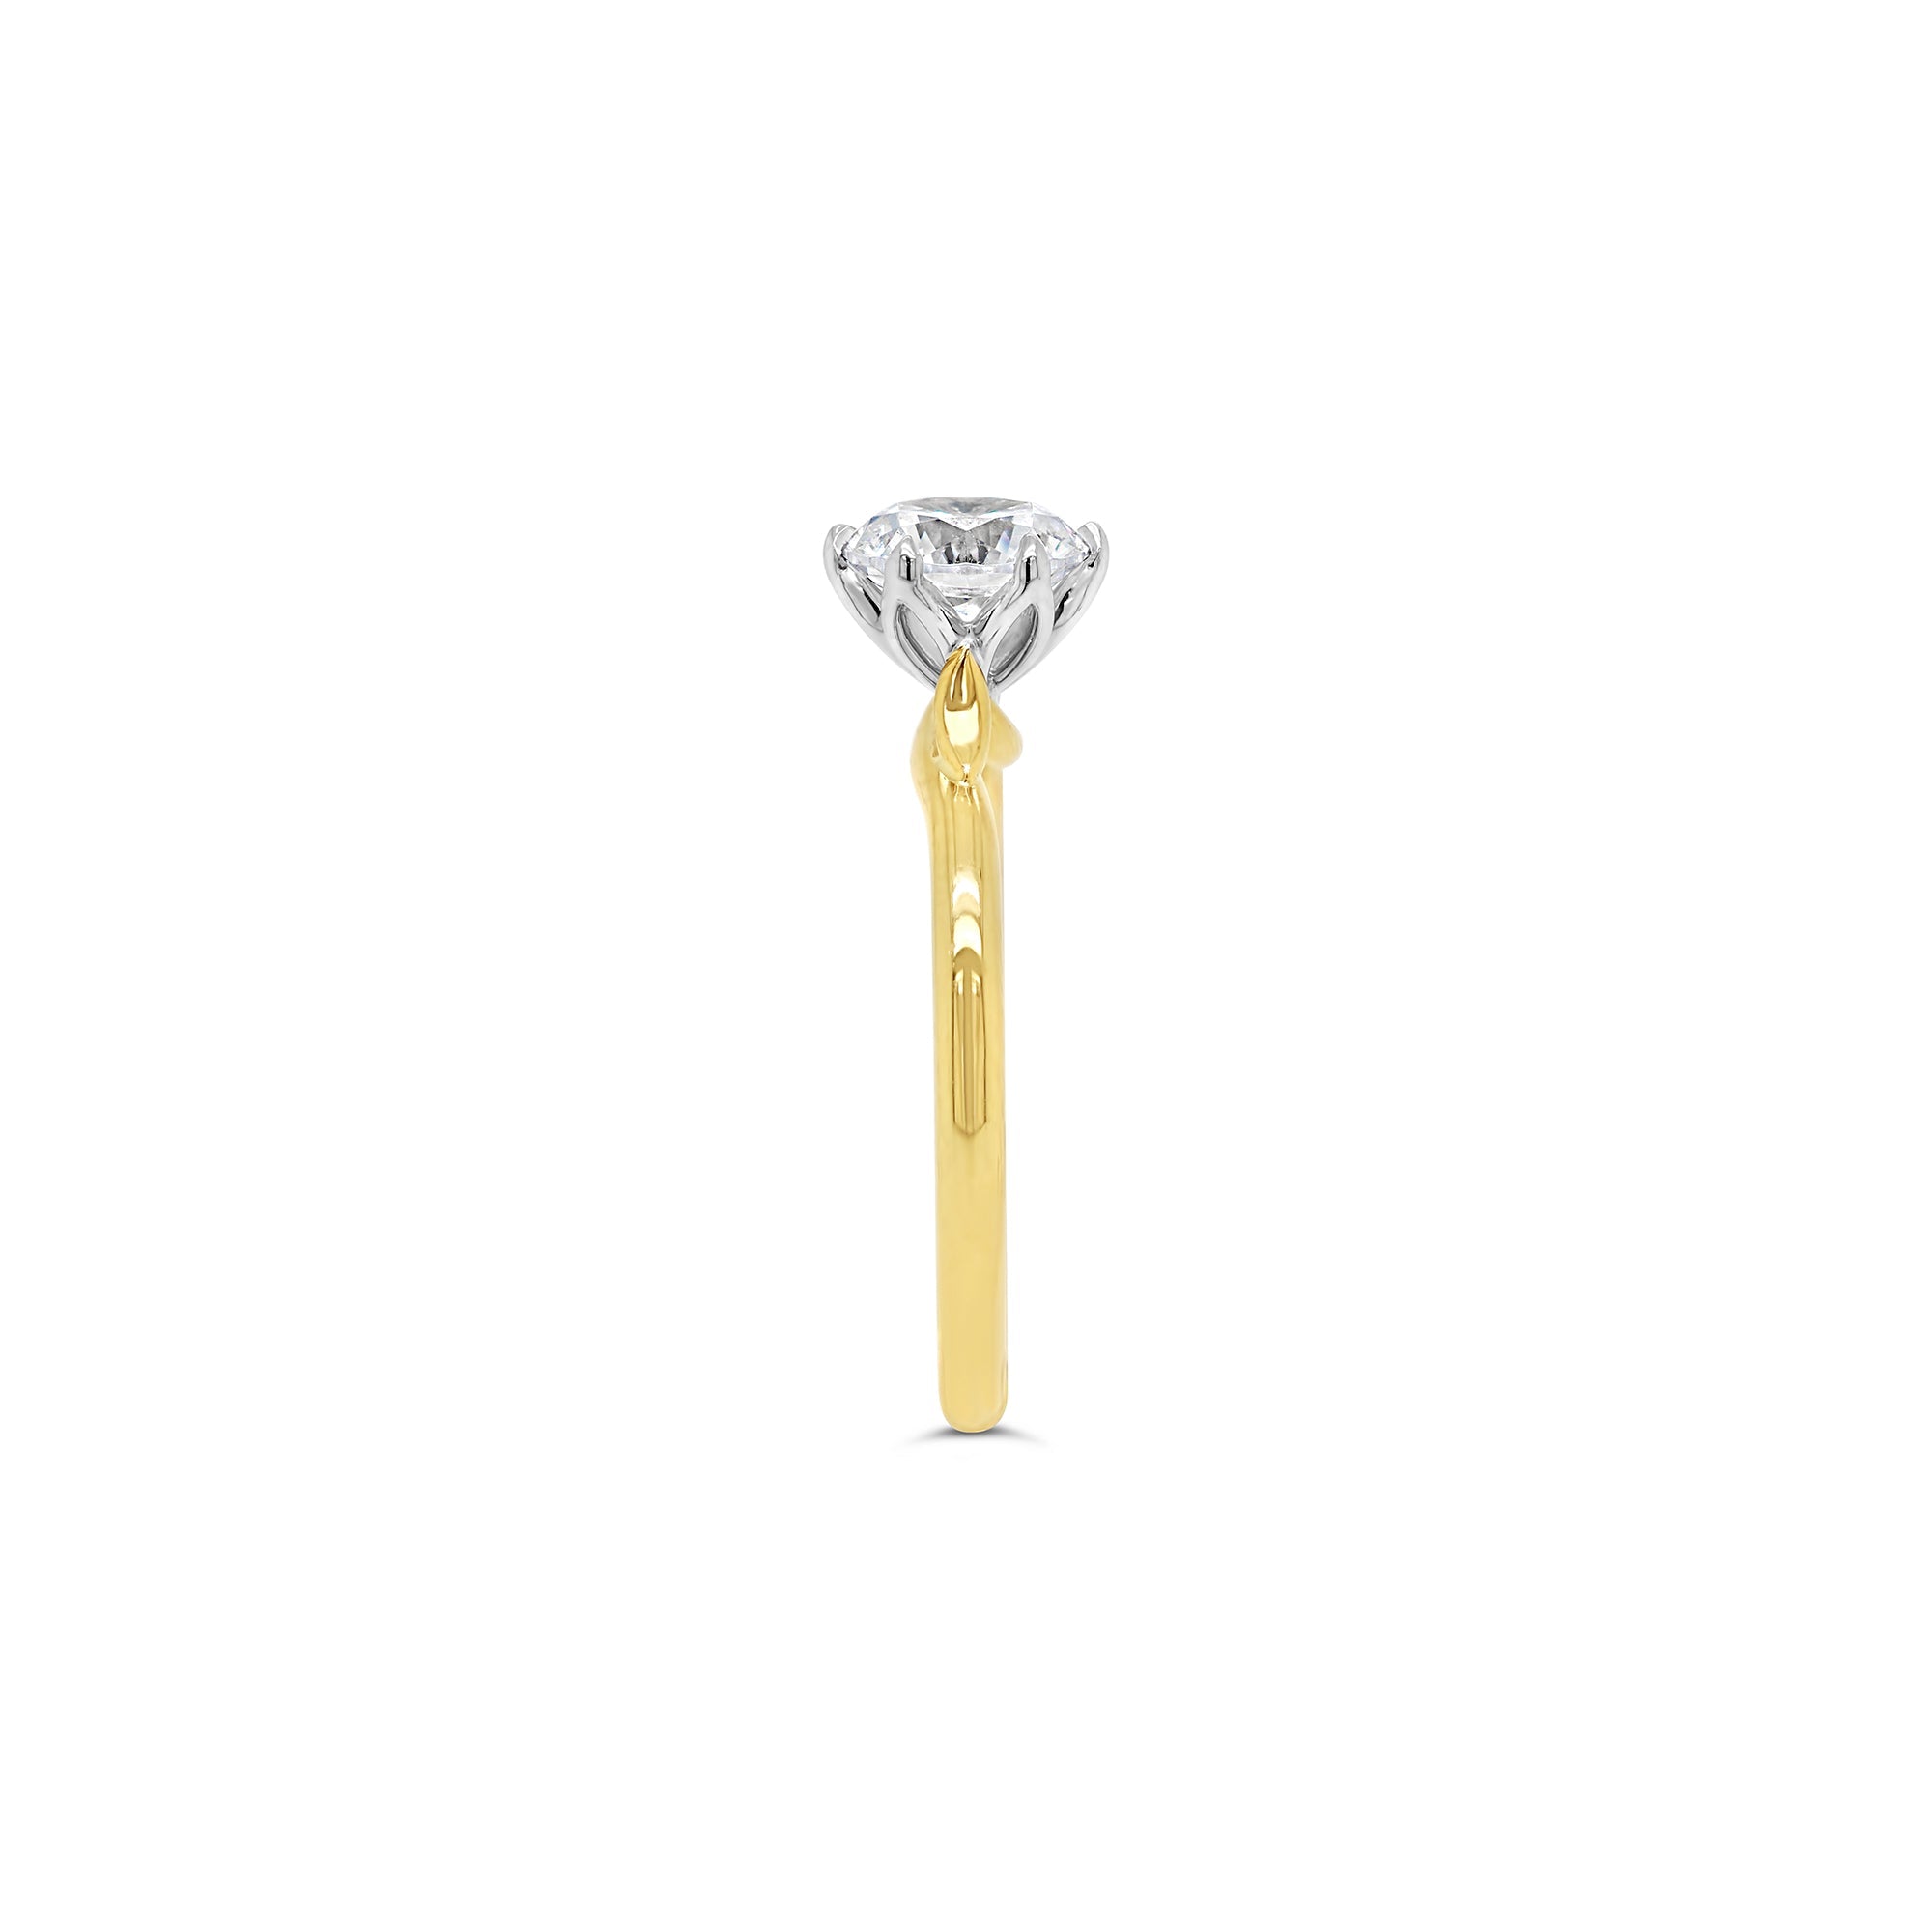 Round Brilliant Cut Diamond Solitaire Engagement Ring Yellow Gold